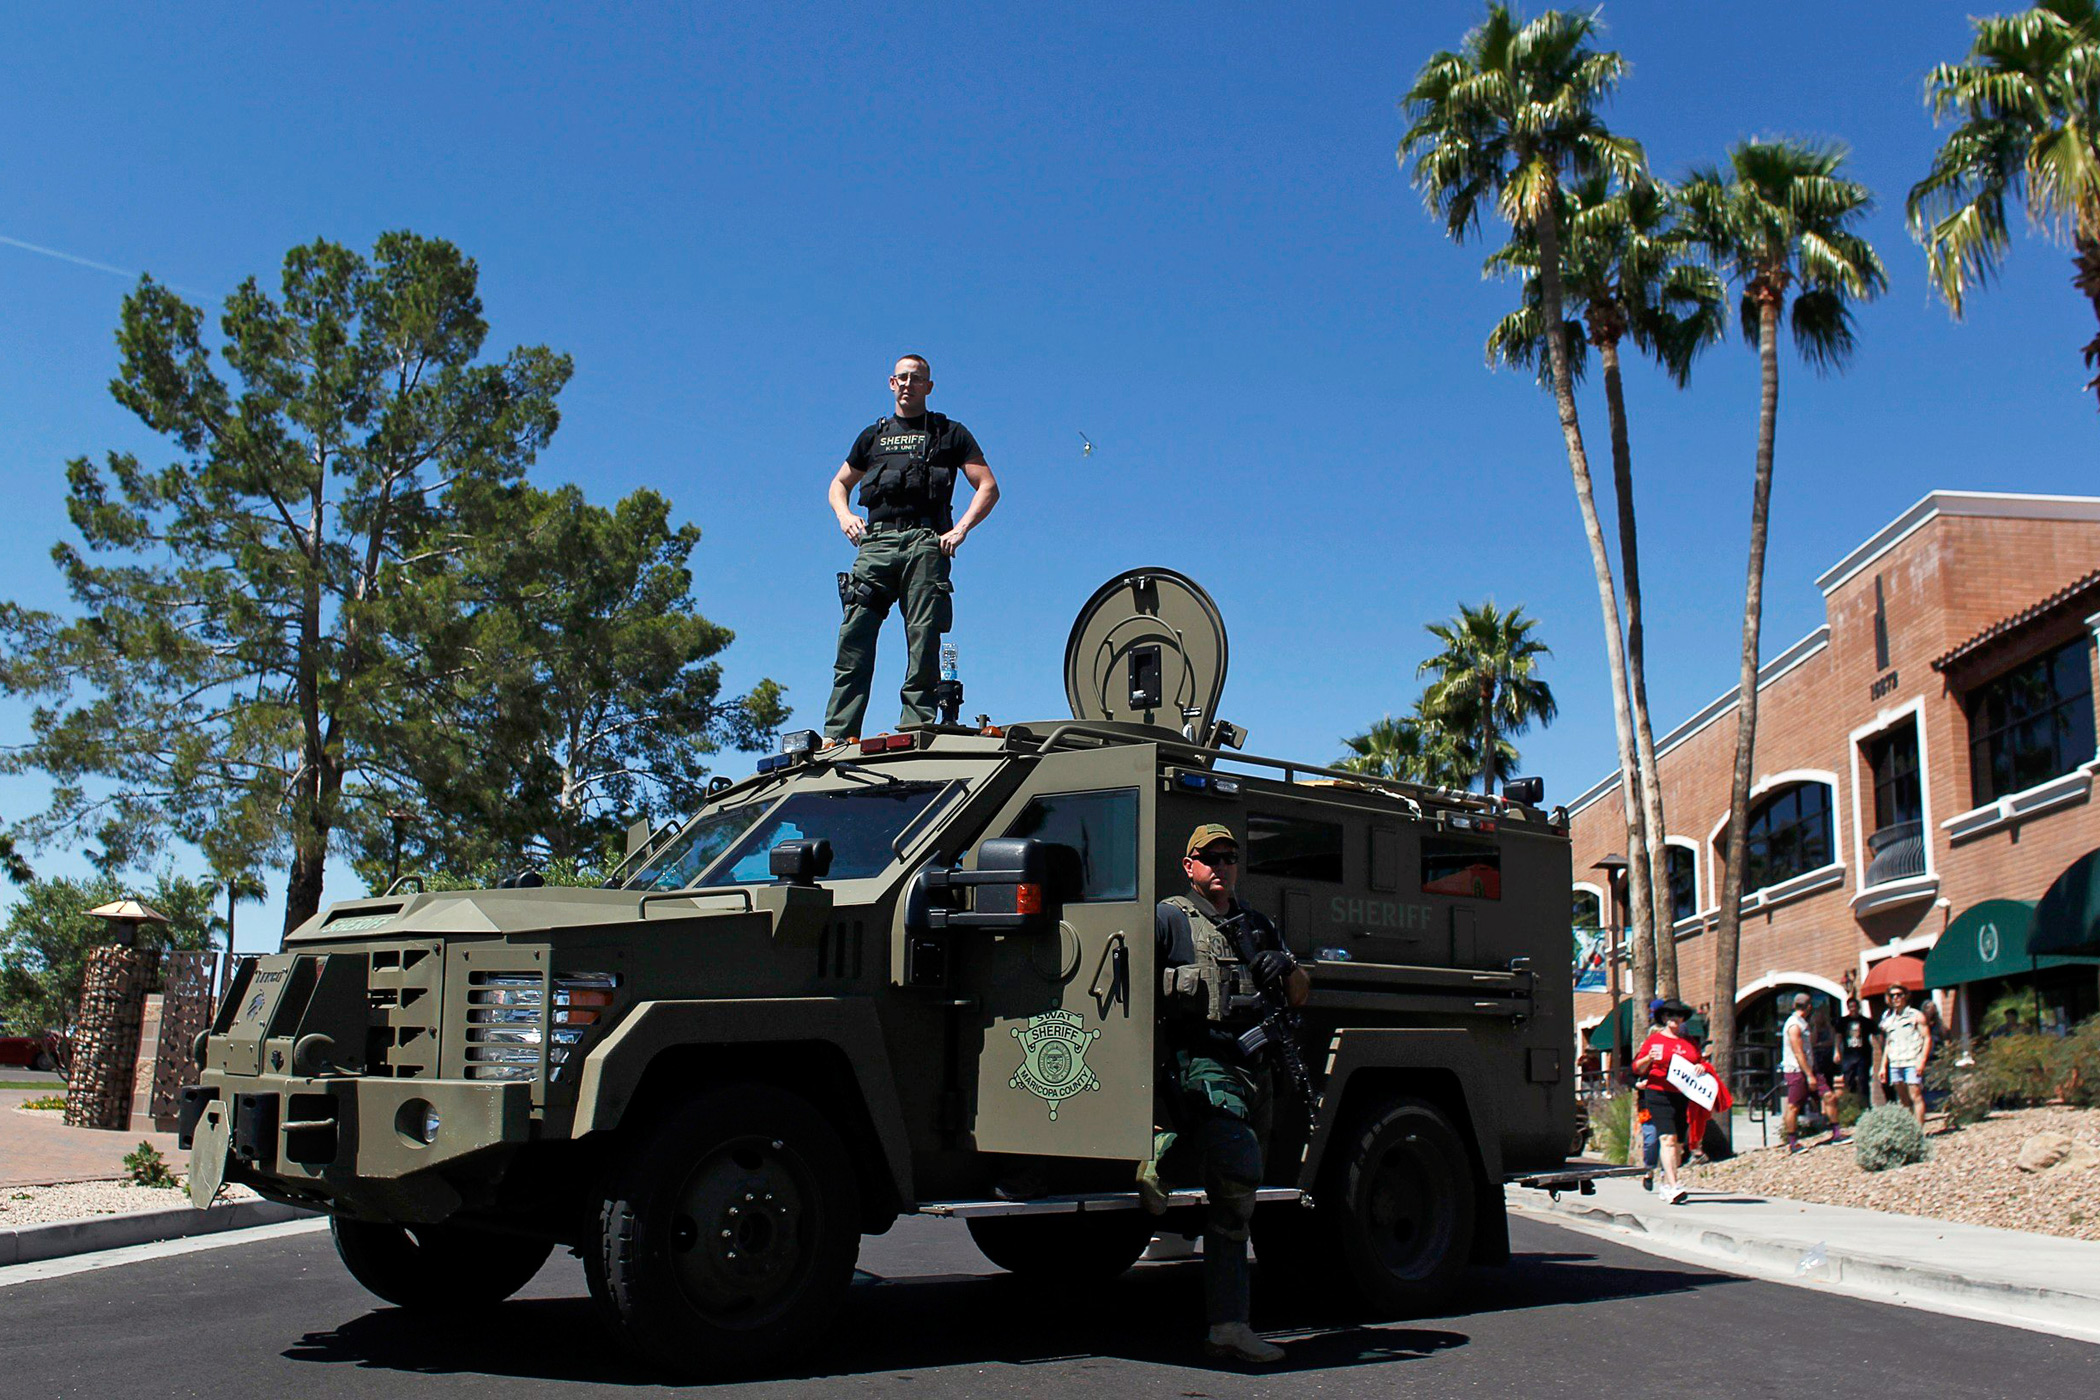 Maricopa County, Arizona police SWAT team stand guard with an armored vehicle outside a campaign rally for Republican presidential candidate Donald Trump in Fountain Hills, Ariz. on March 19.